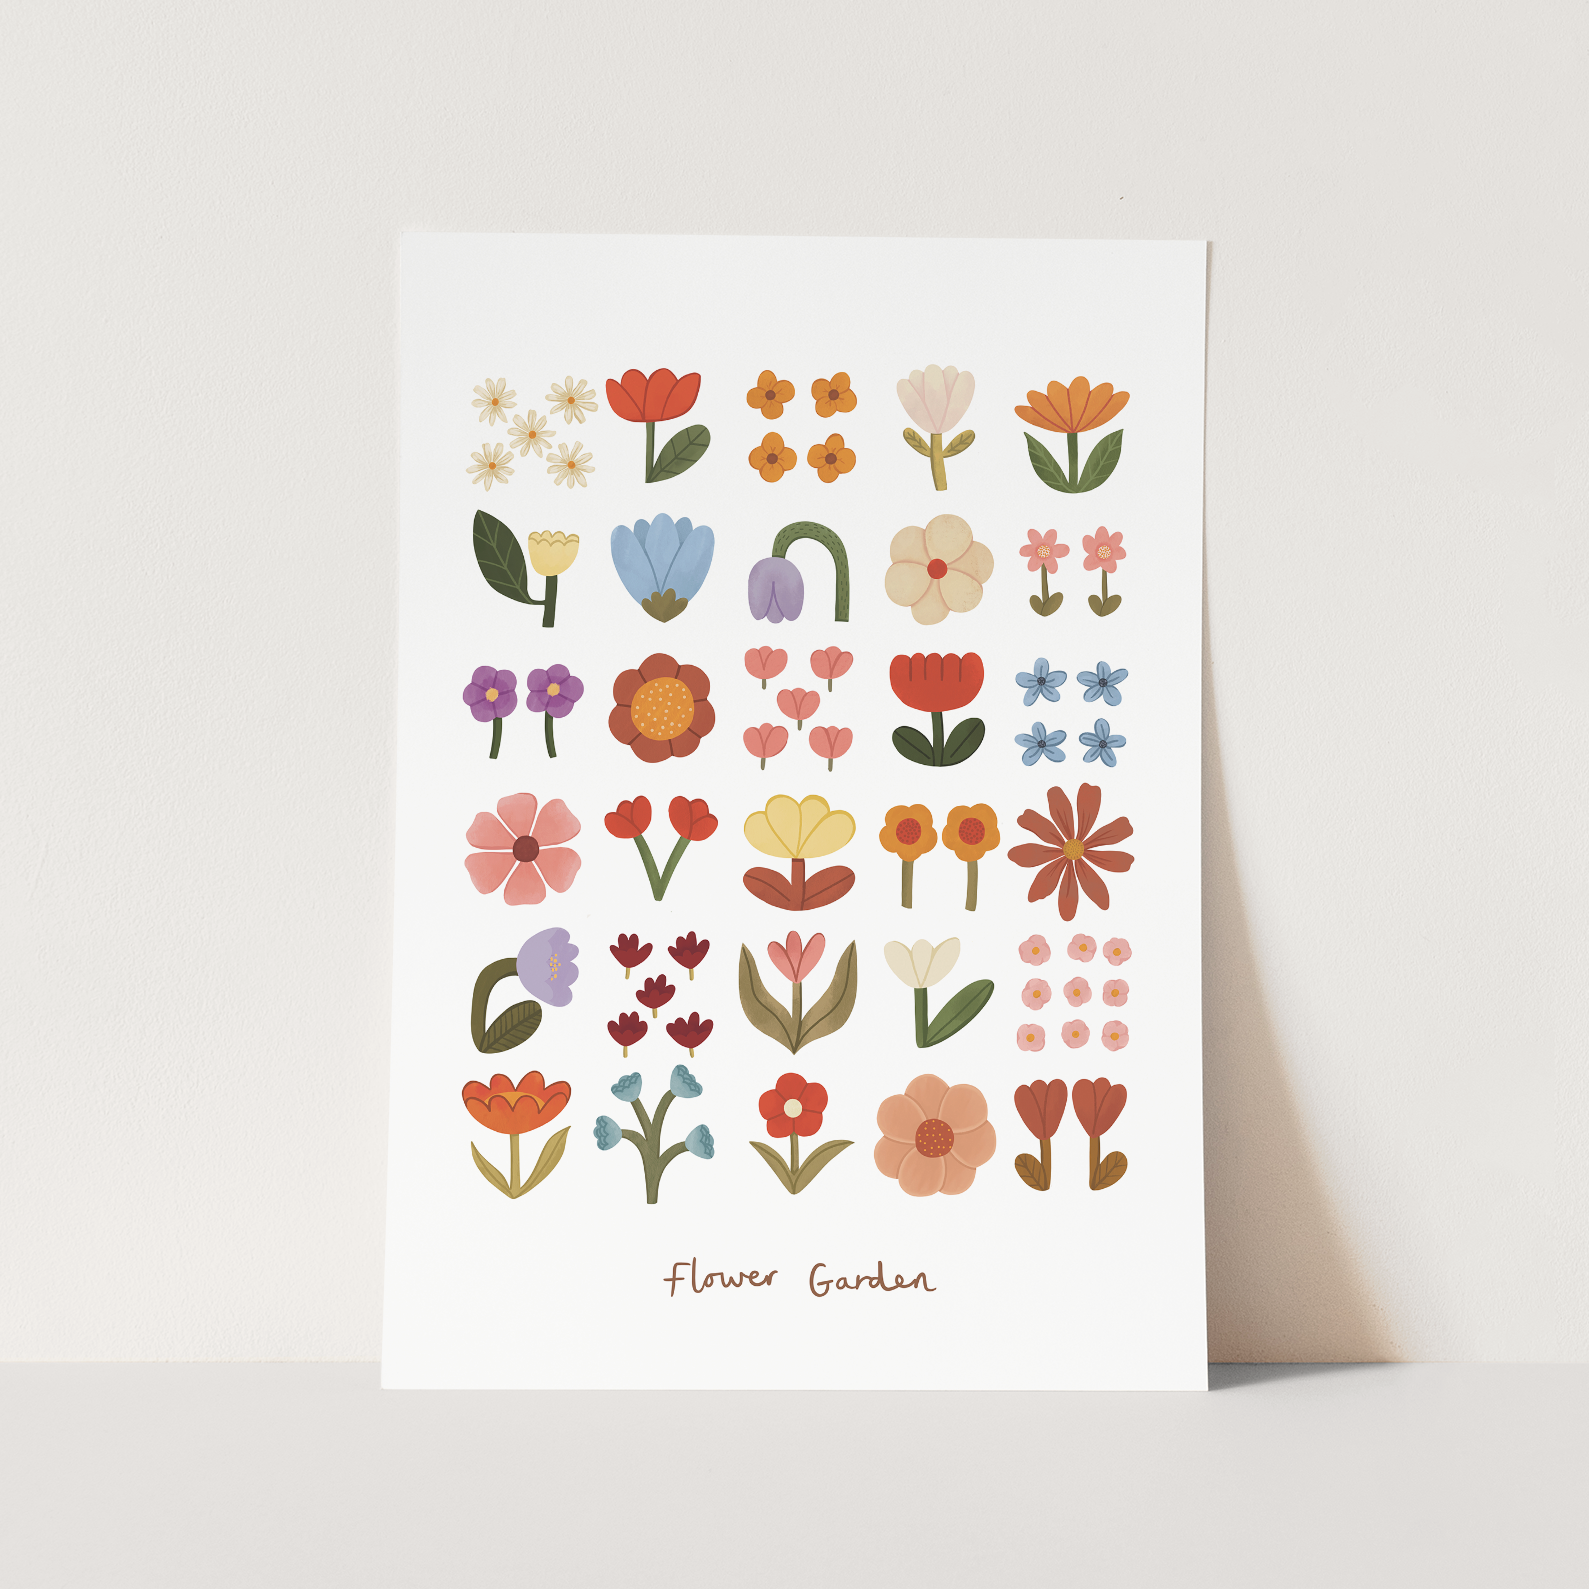 Flower Garden Art Print in White by Kid of the Village (7 Sizes Available)